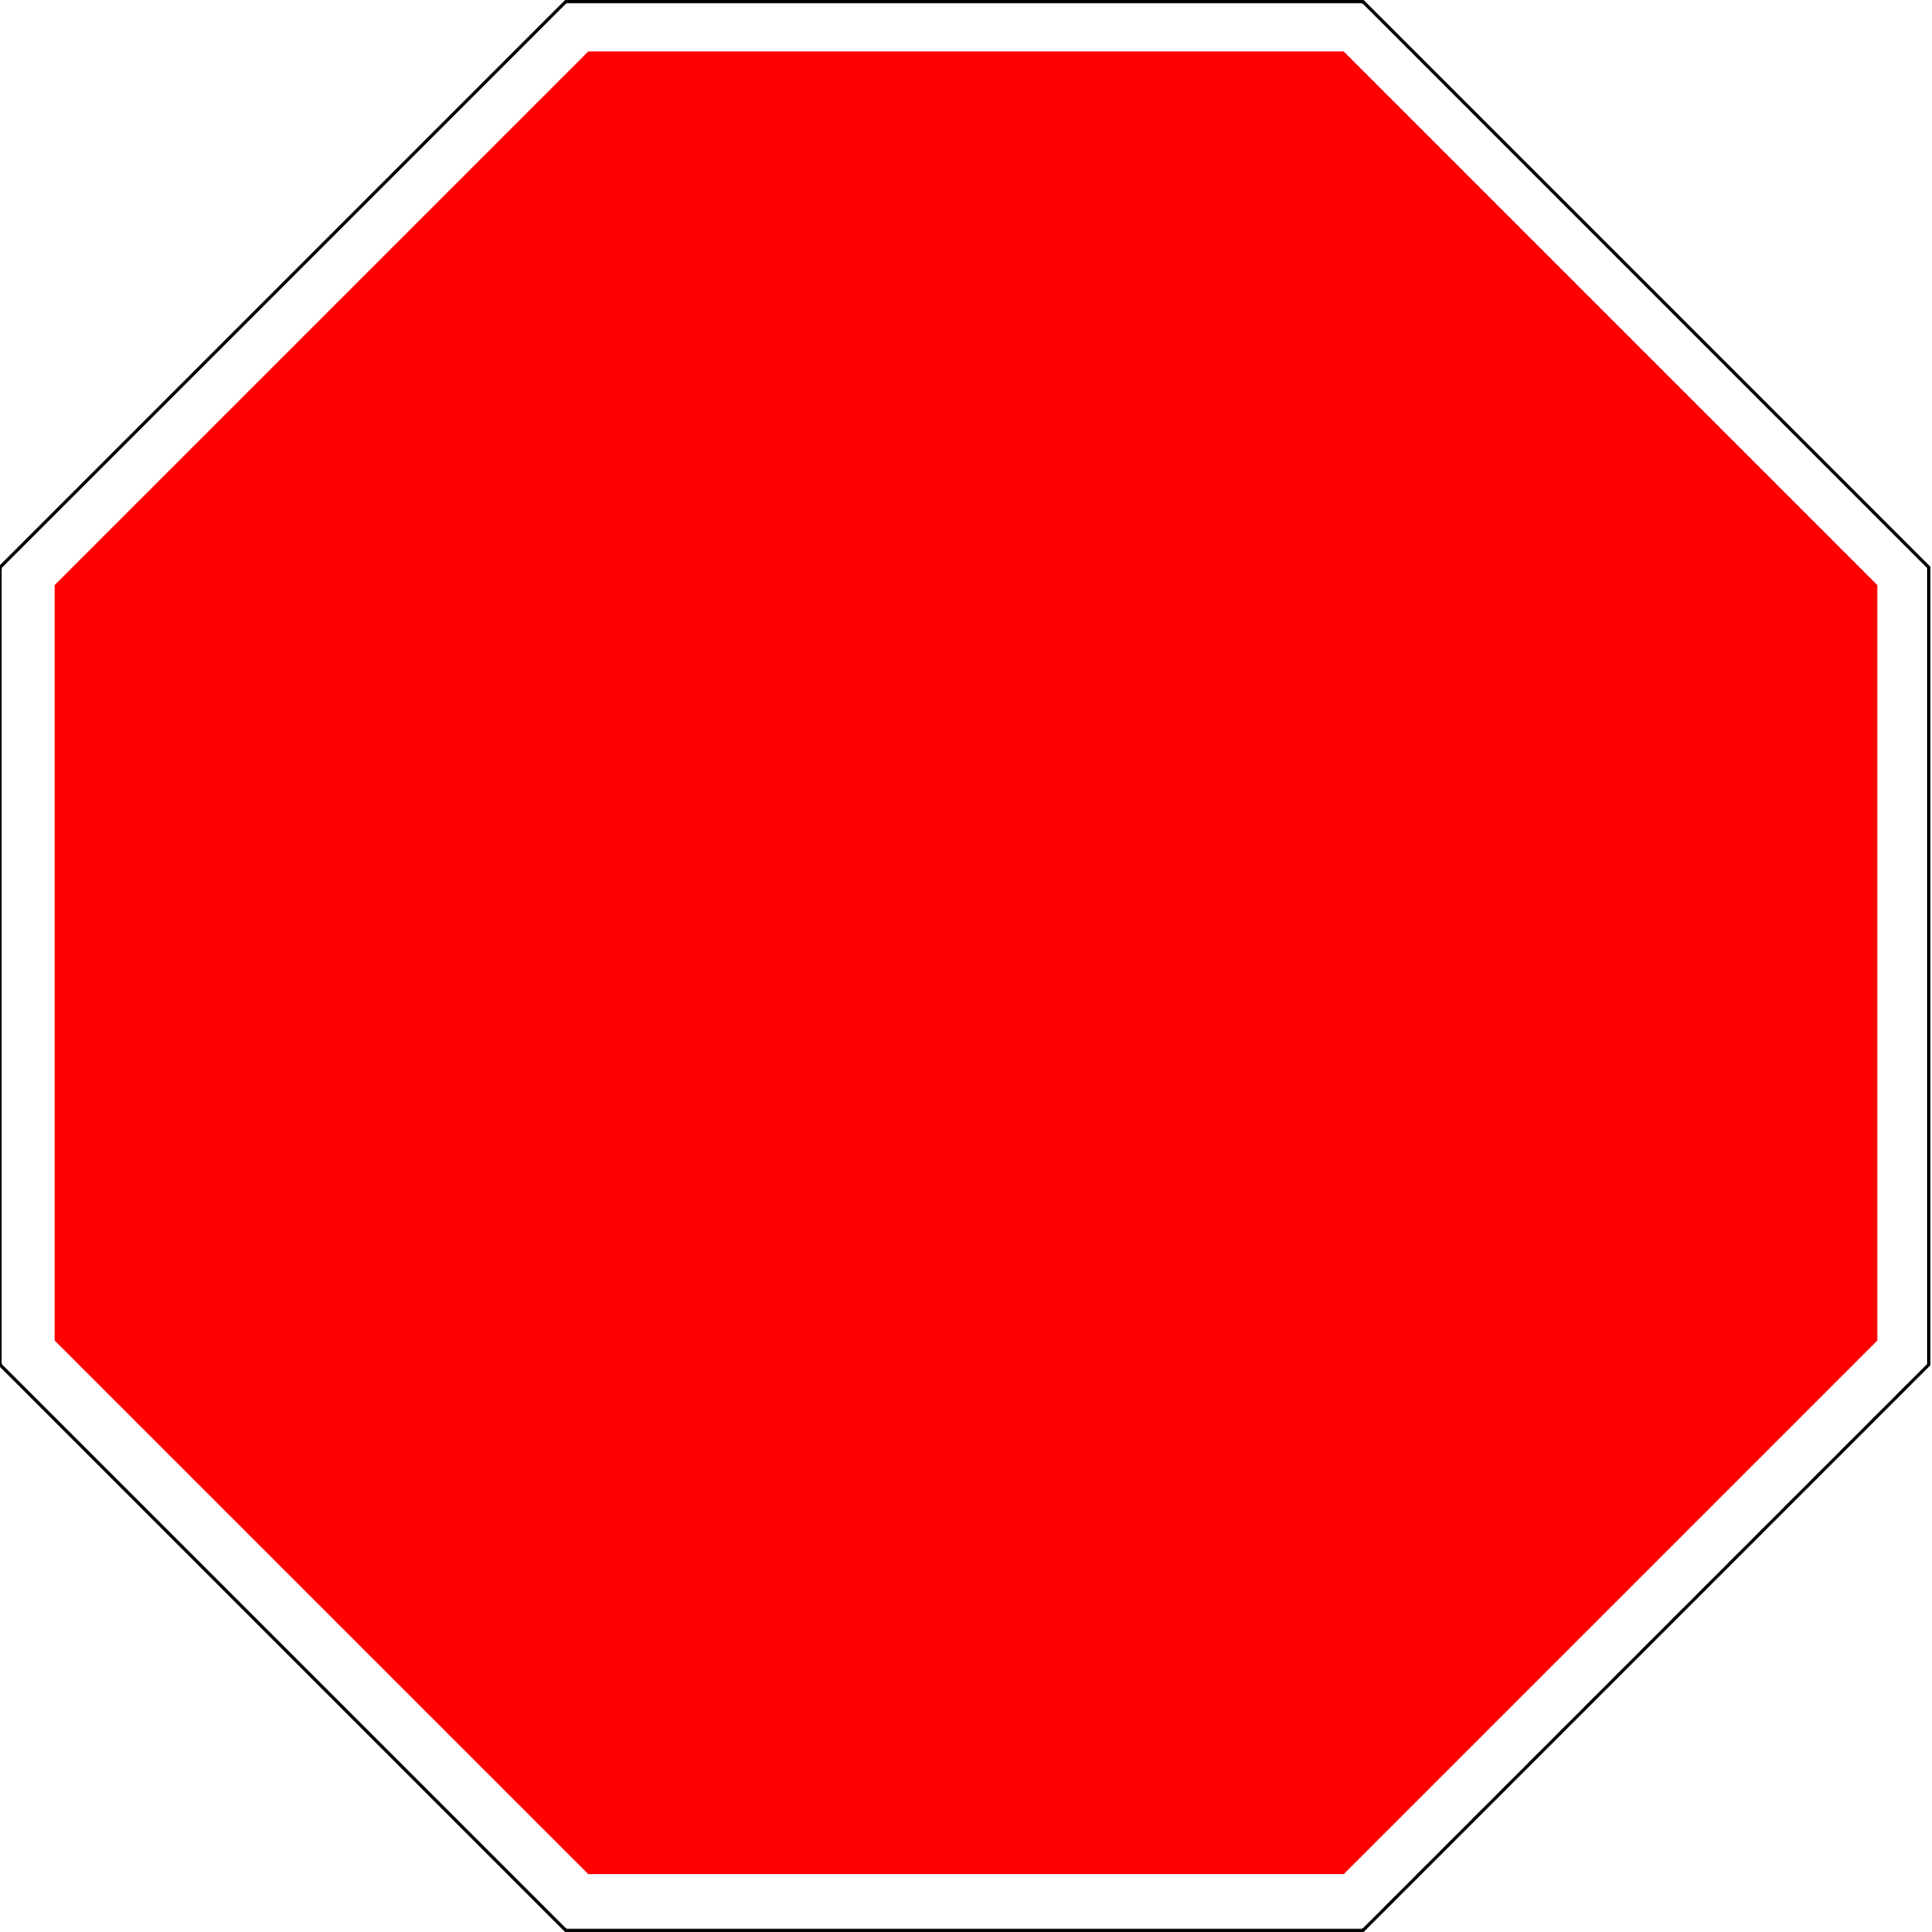 Blank Stop Sign Printable - ClipArt Best